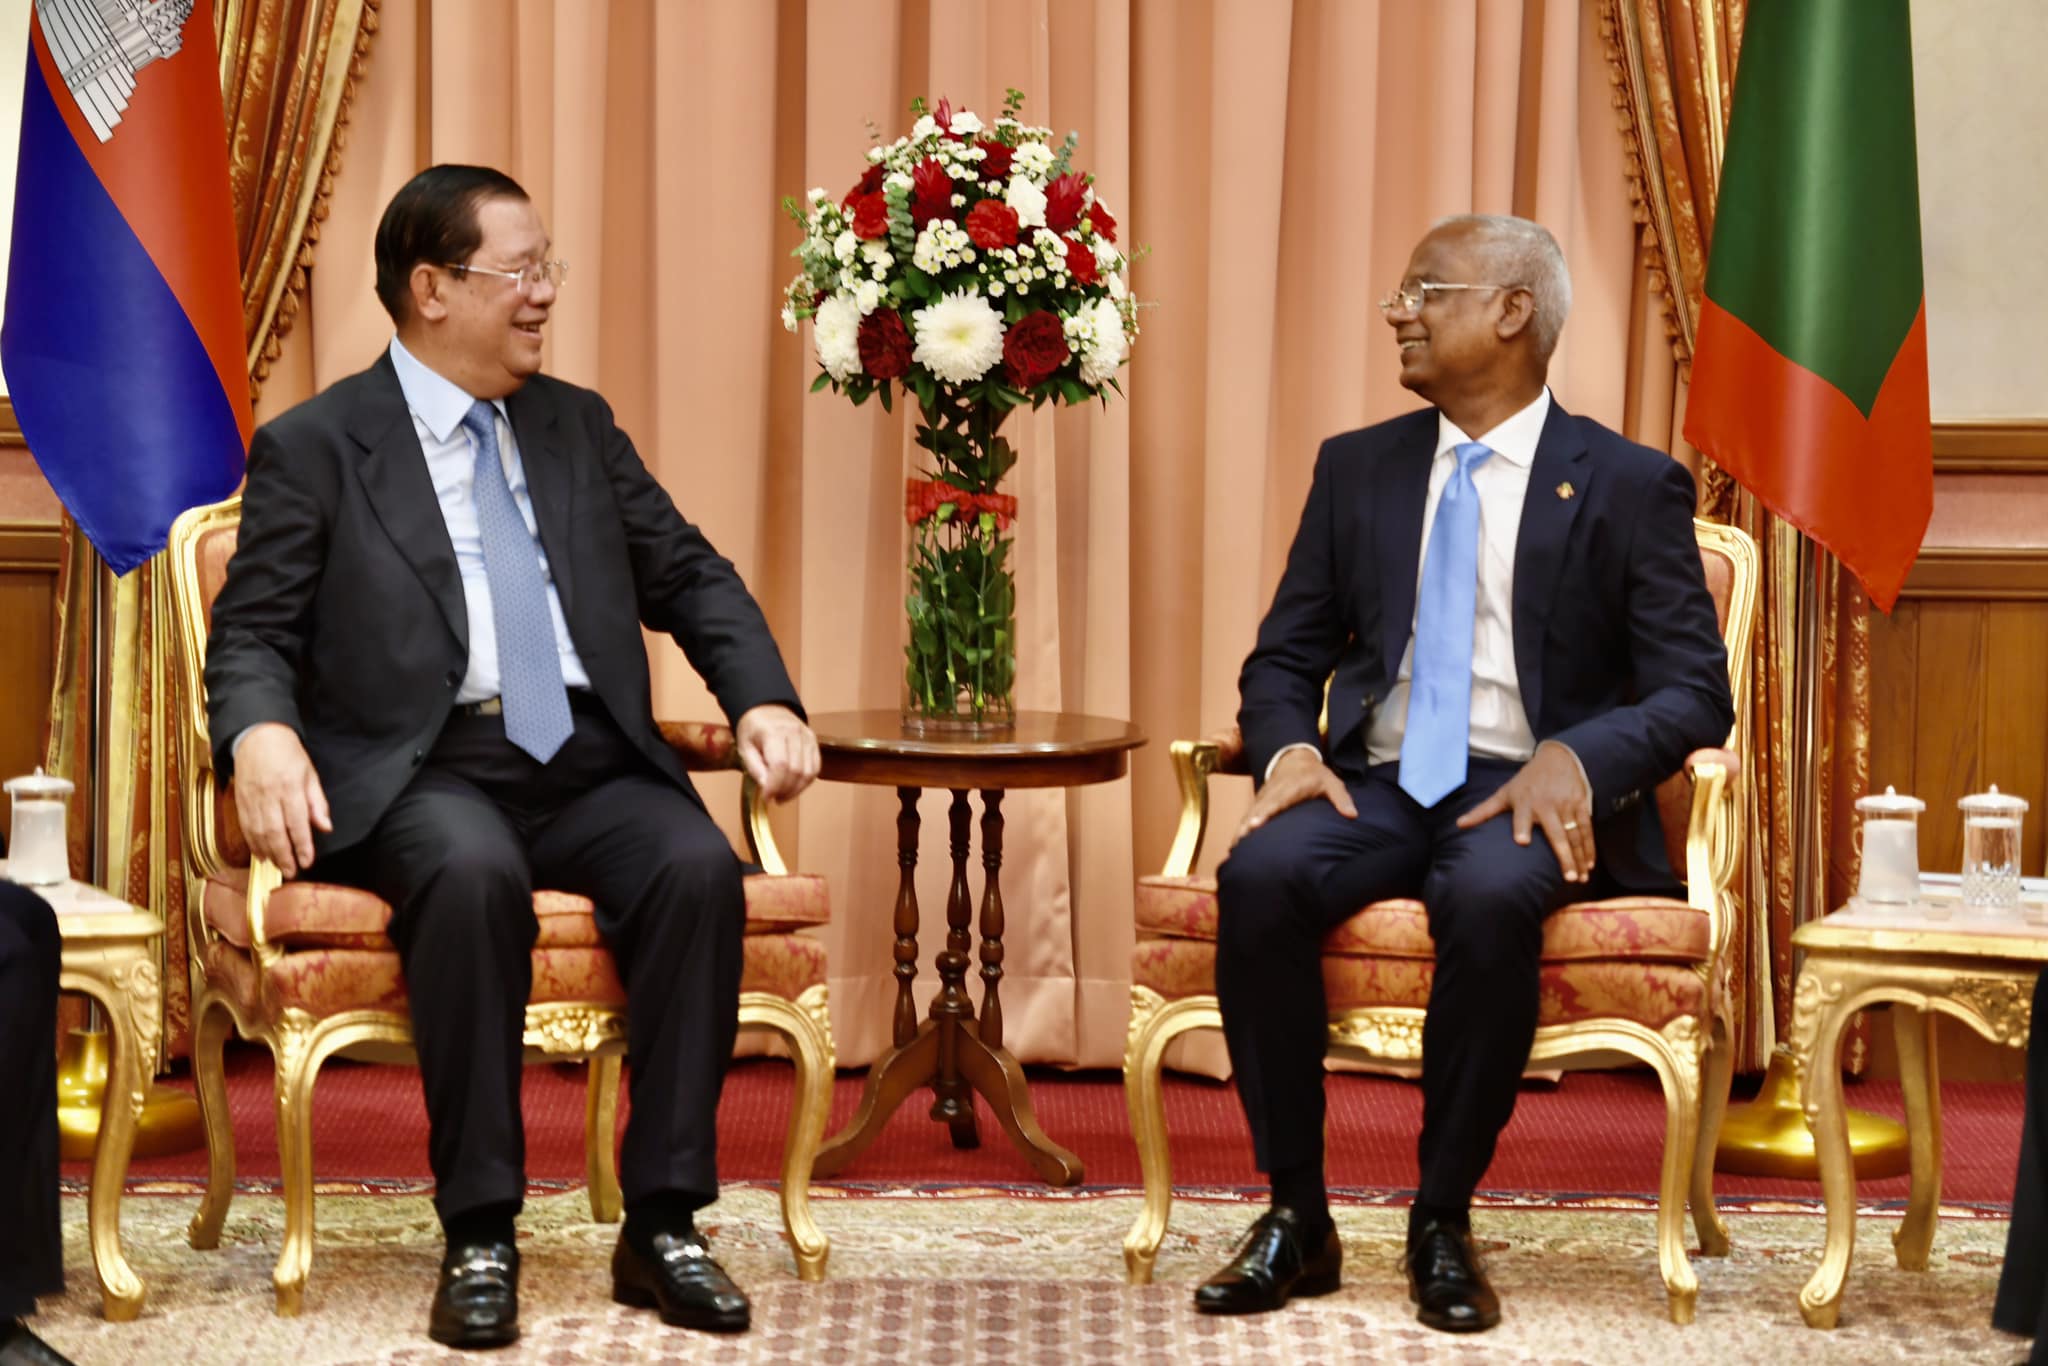 On the morning of January 16, 2023, Samdech Techo Hun Sen holds bilateral talks with H.E. Ibrahim Mohamed Solih, President of the Republic of Maldives, during his official 3-days visit to the Republic of Maldives.